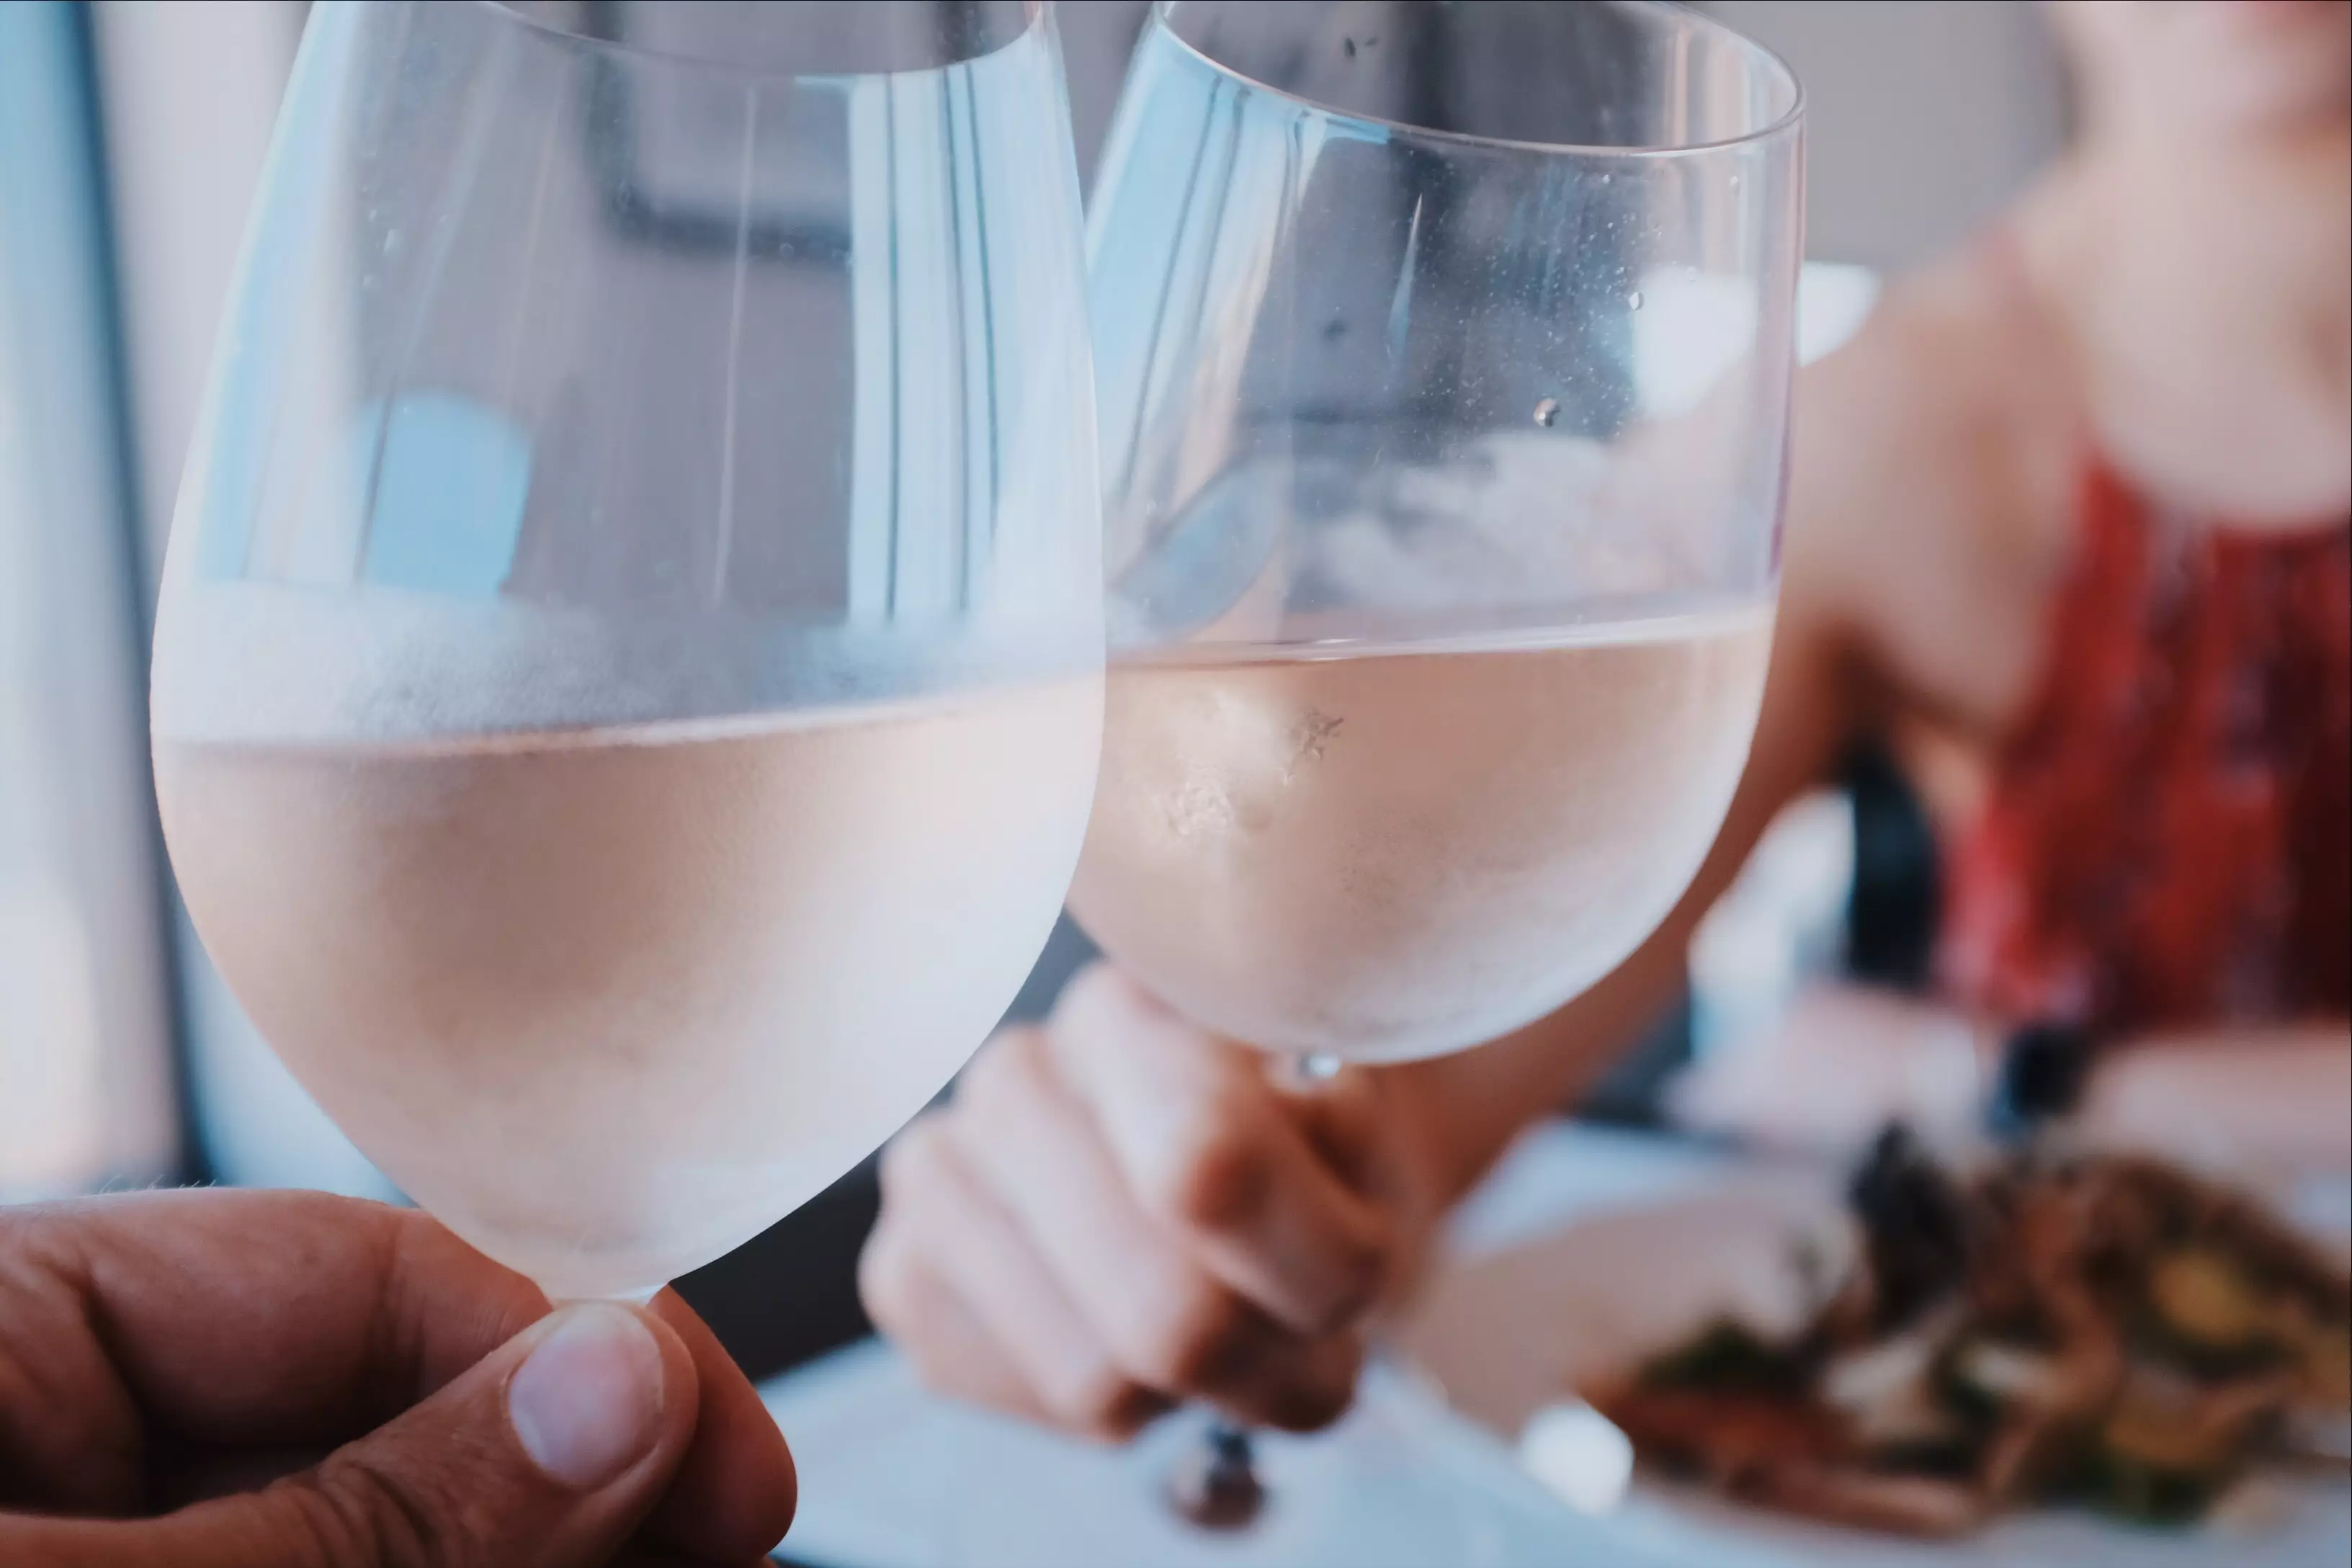 With temperatures hotting up over the weekend, it's definitely rose-drinking weather (